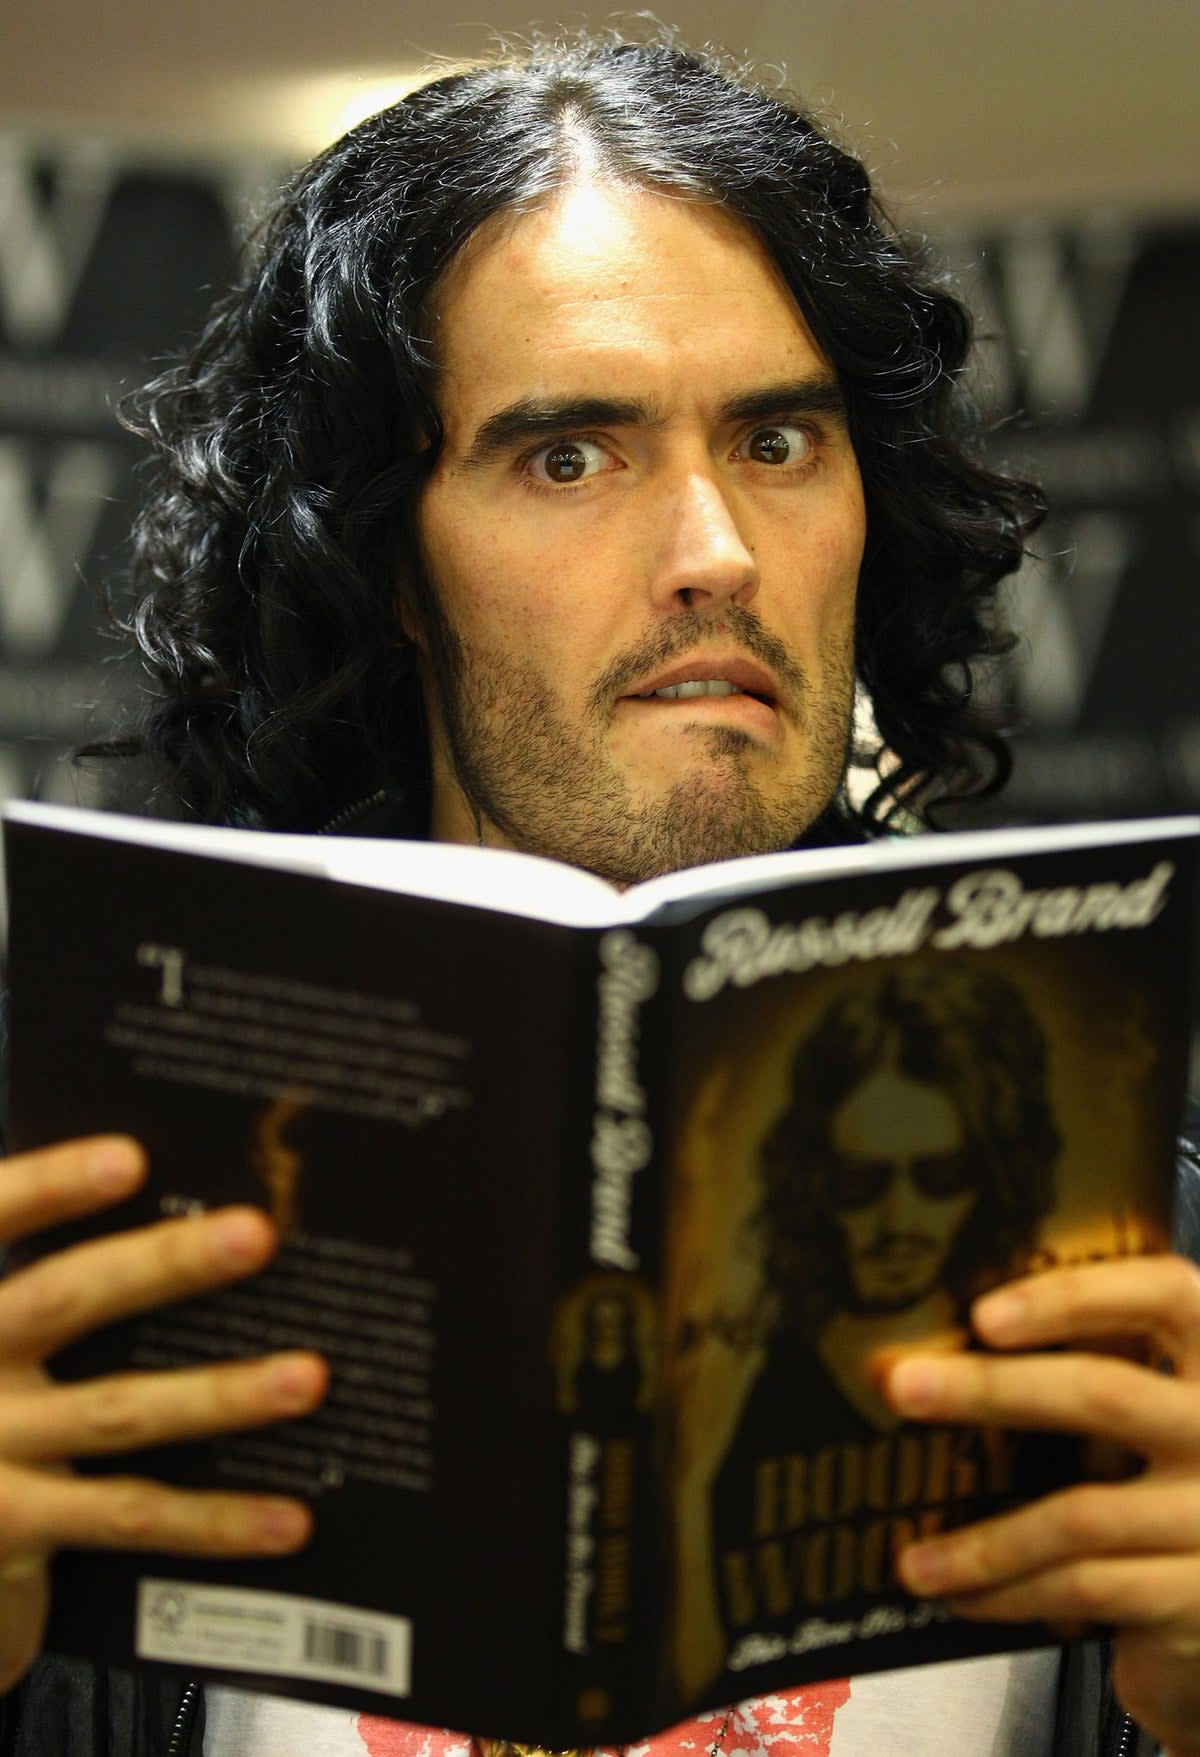 Russell Brand wrote ‘My Booky Wook’ detailing his tumultuous past (Getty Images)